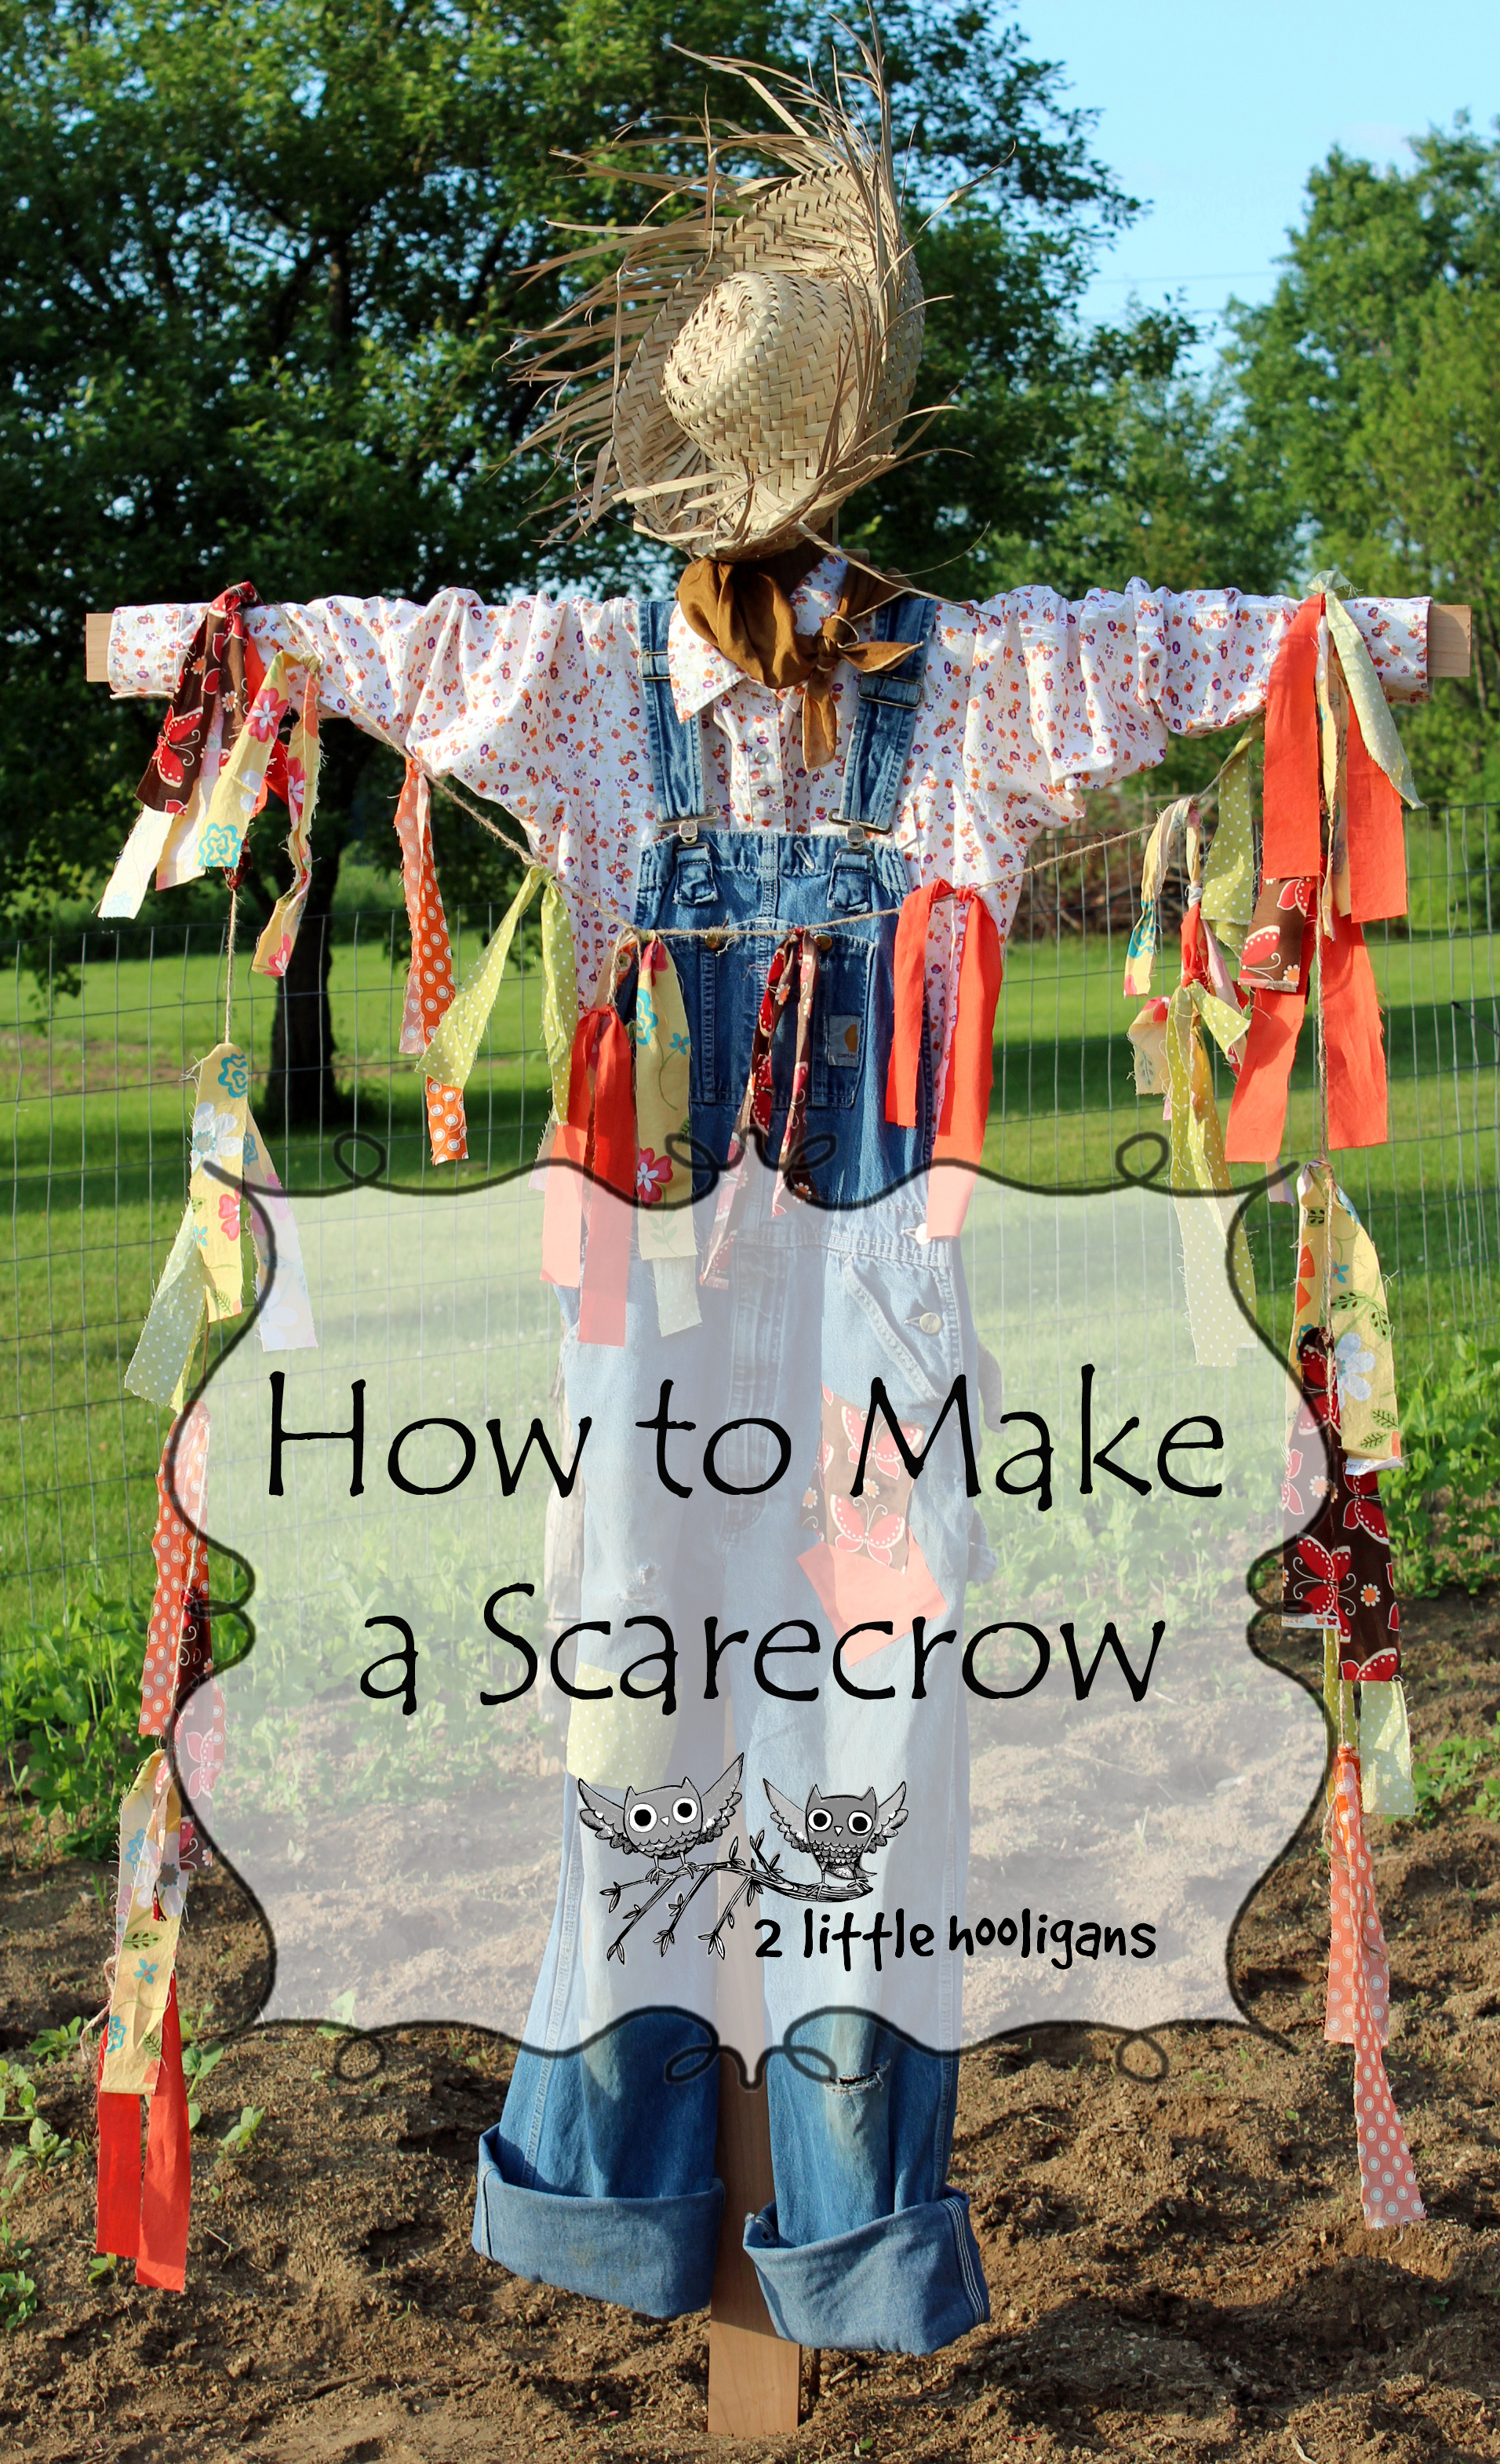 How to Make a Scarecrow.